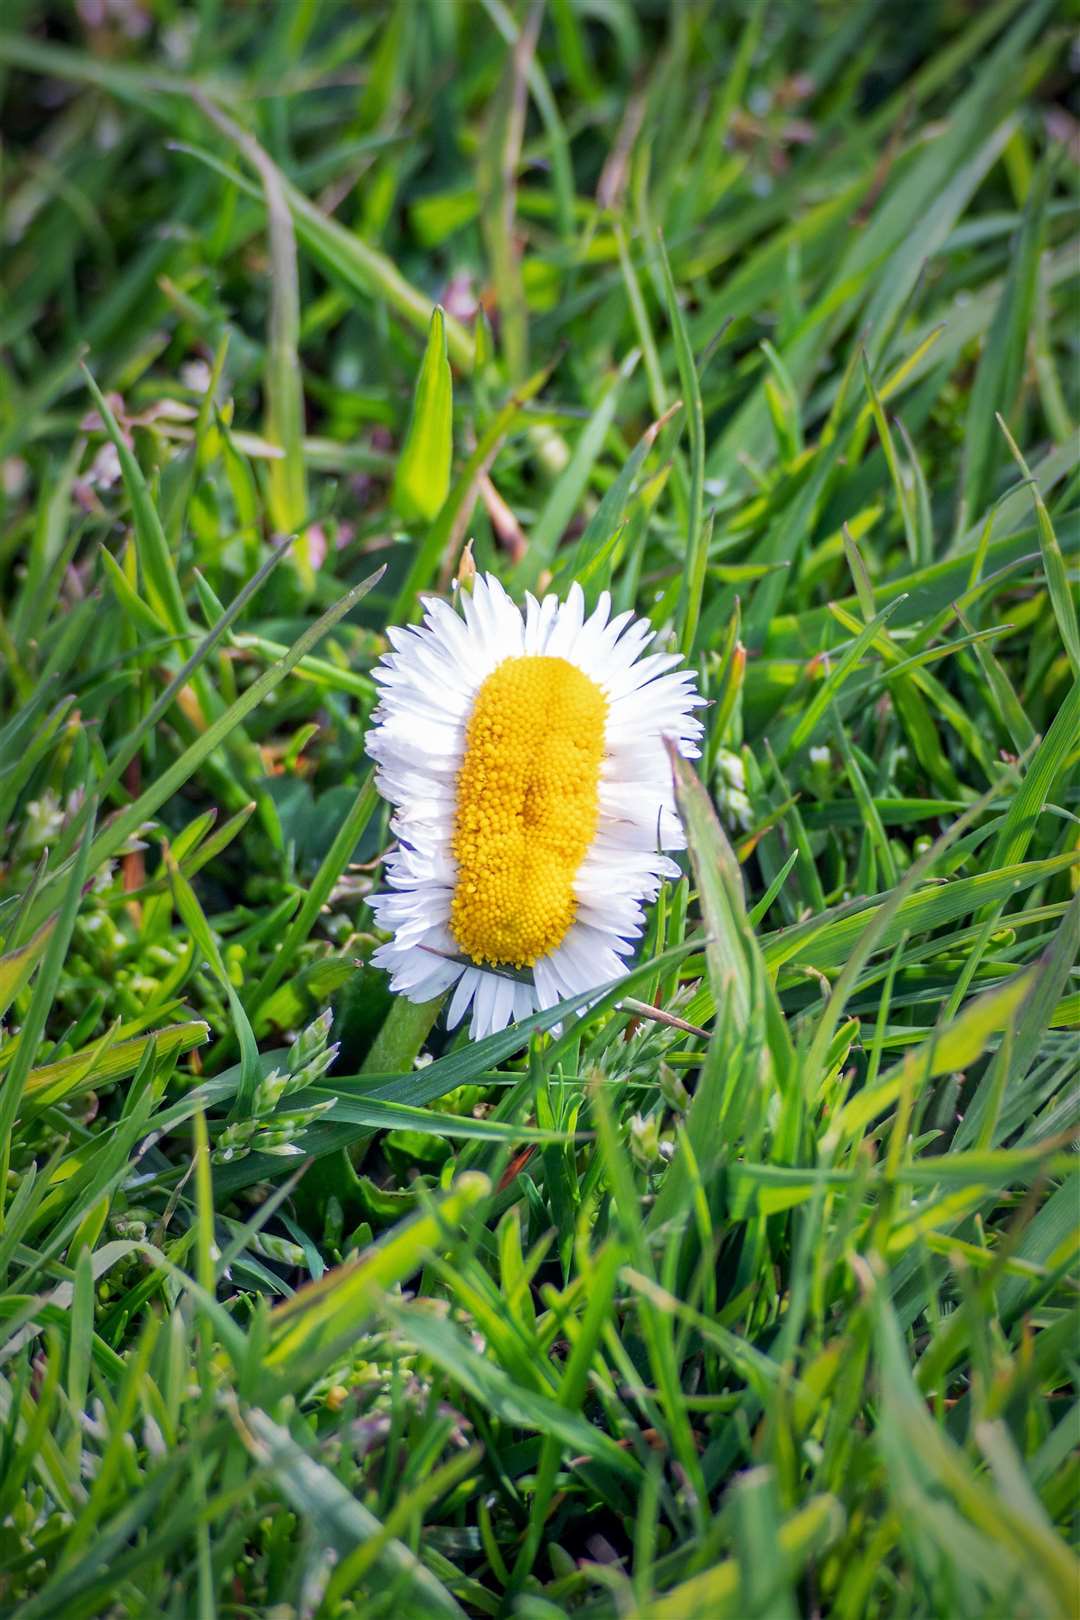 The mutant daisy in situ at Thurso golf course this week. Pictures: Oakley Cundall